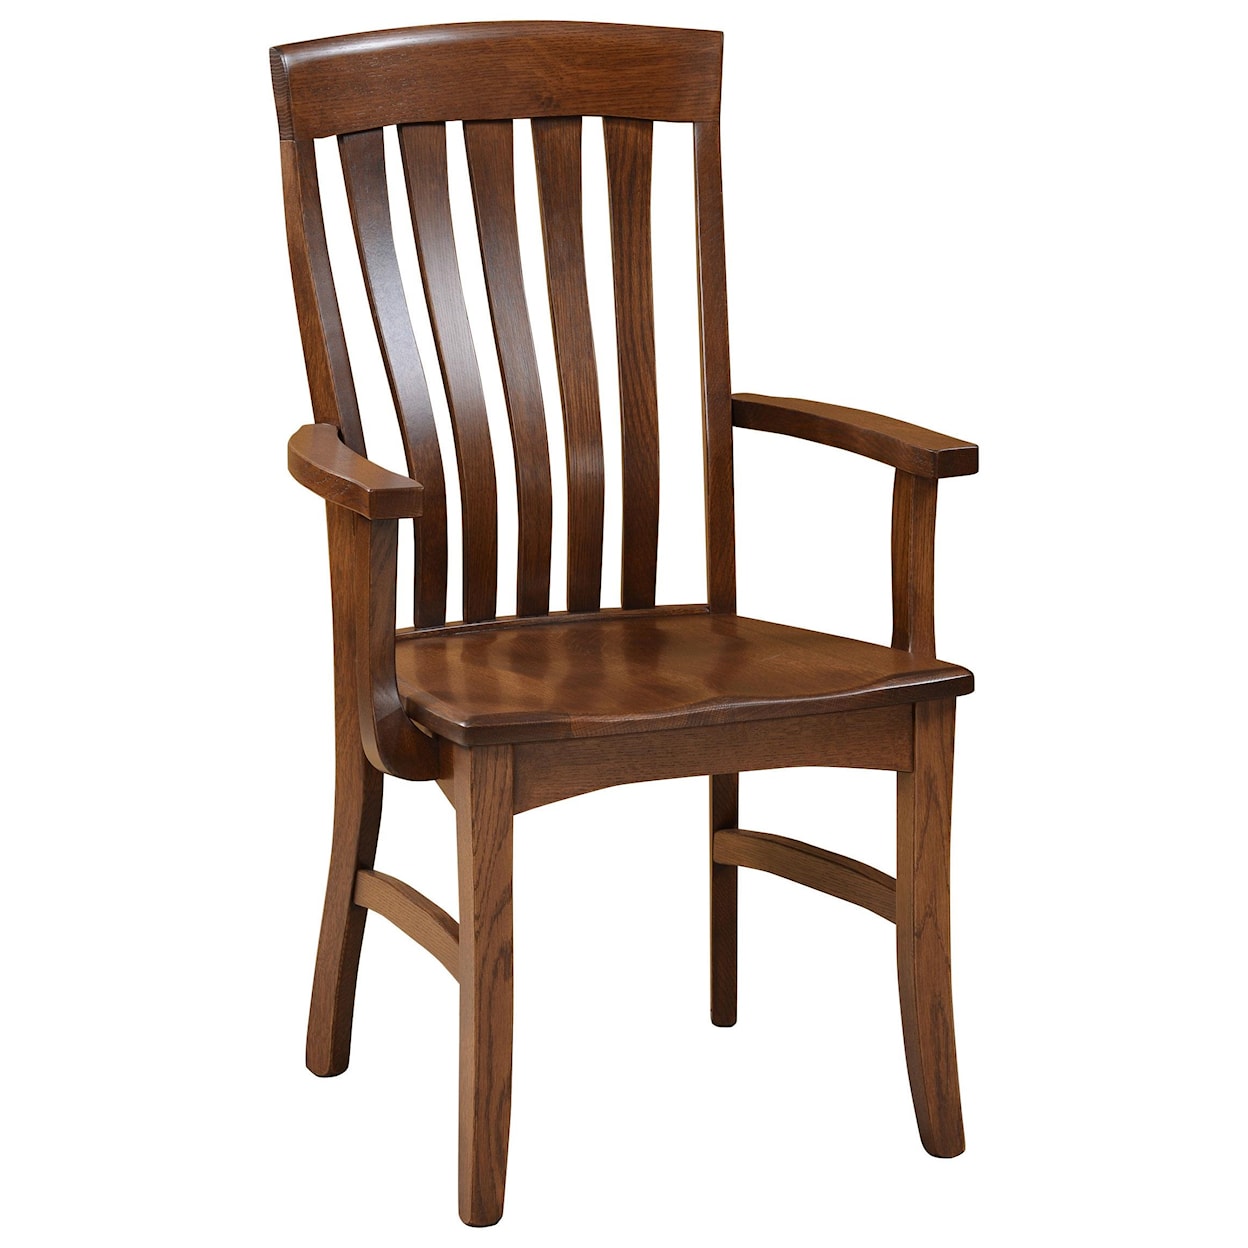 Wengerd Wood Products Richland Arm Chair